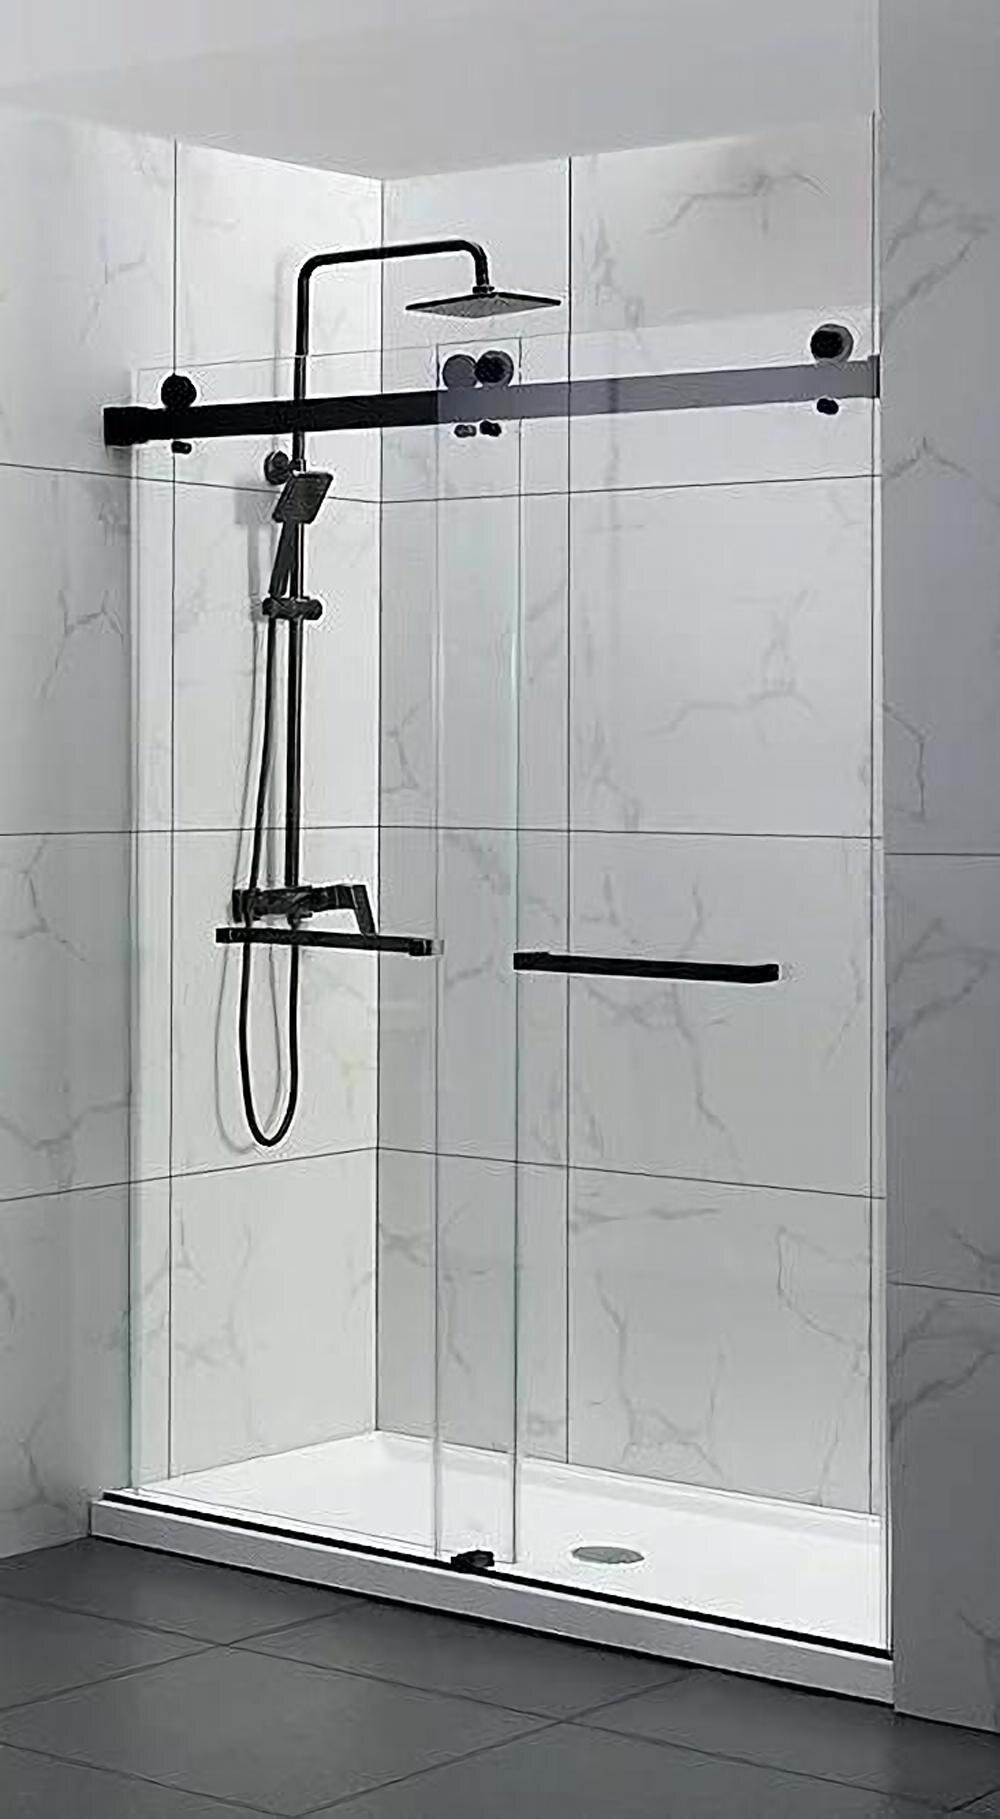 Hometo 61 65 W X 76 H Double Sliding Frameless Shower Door With Clear Glass And Reviews